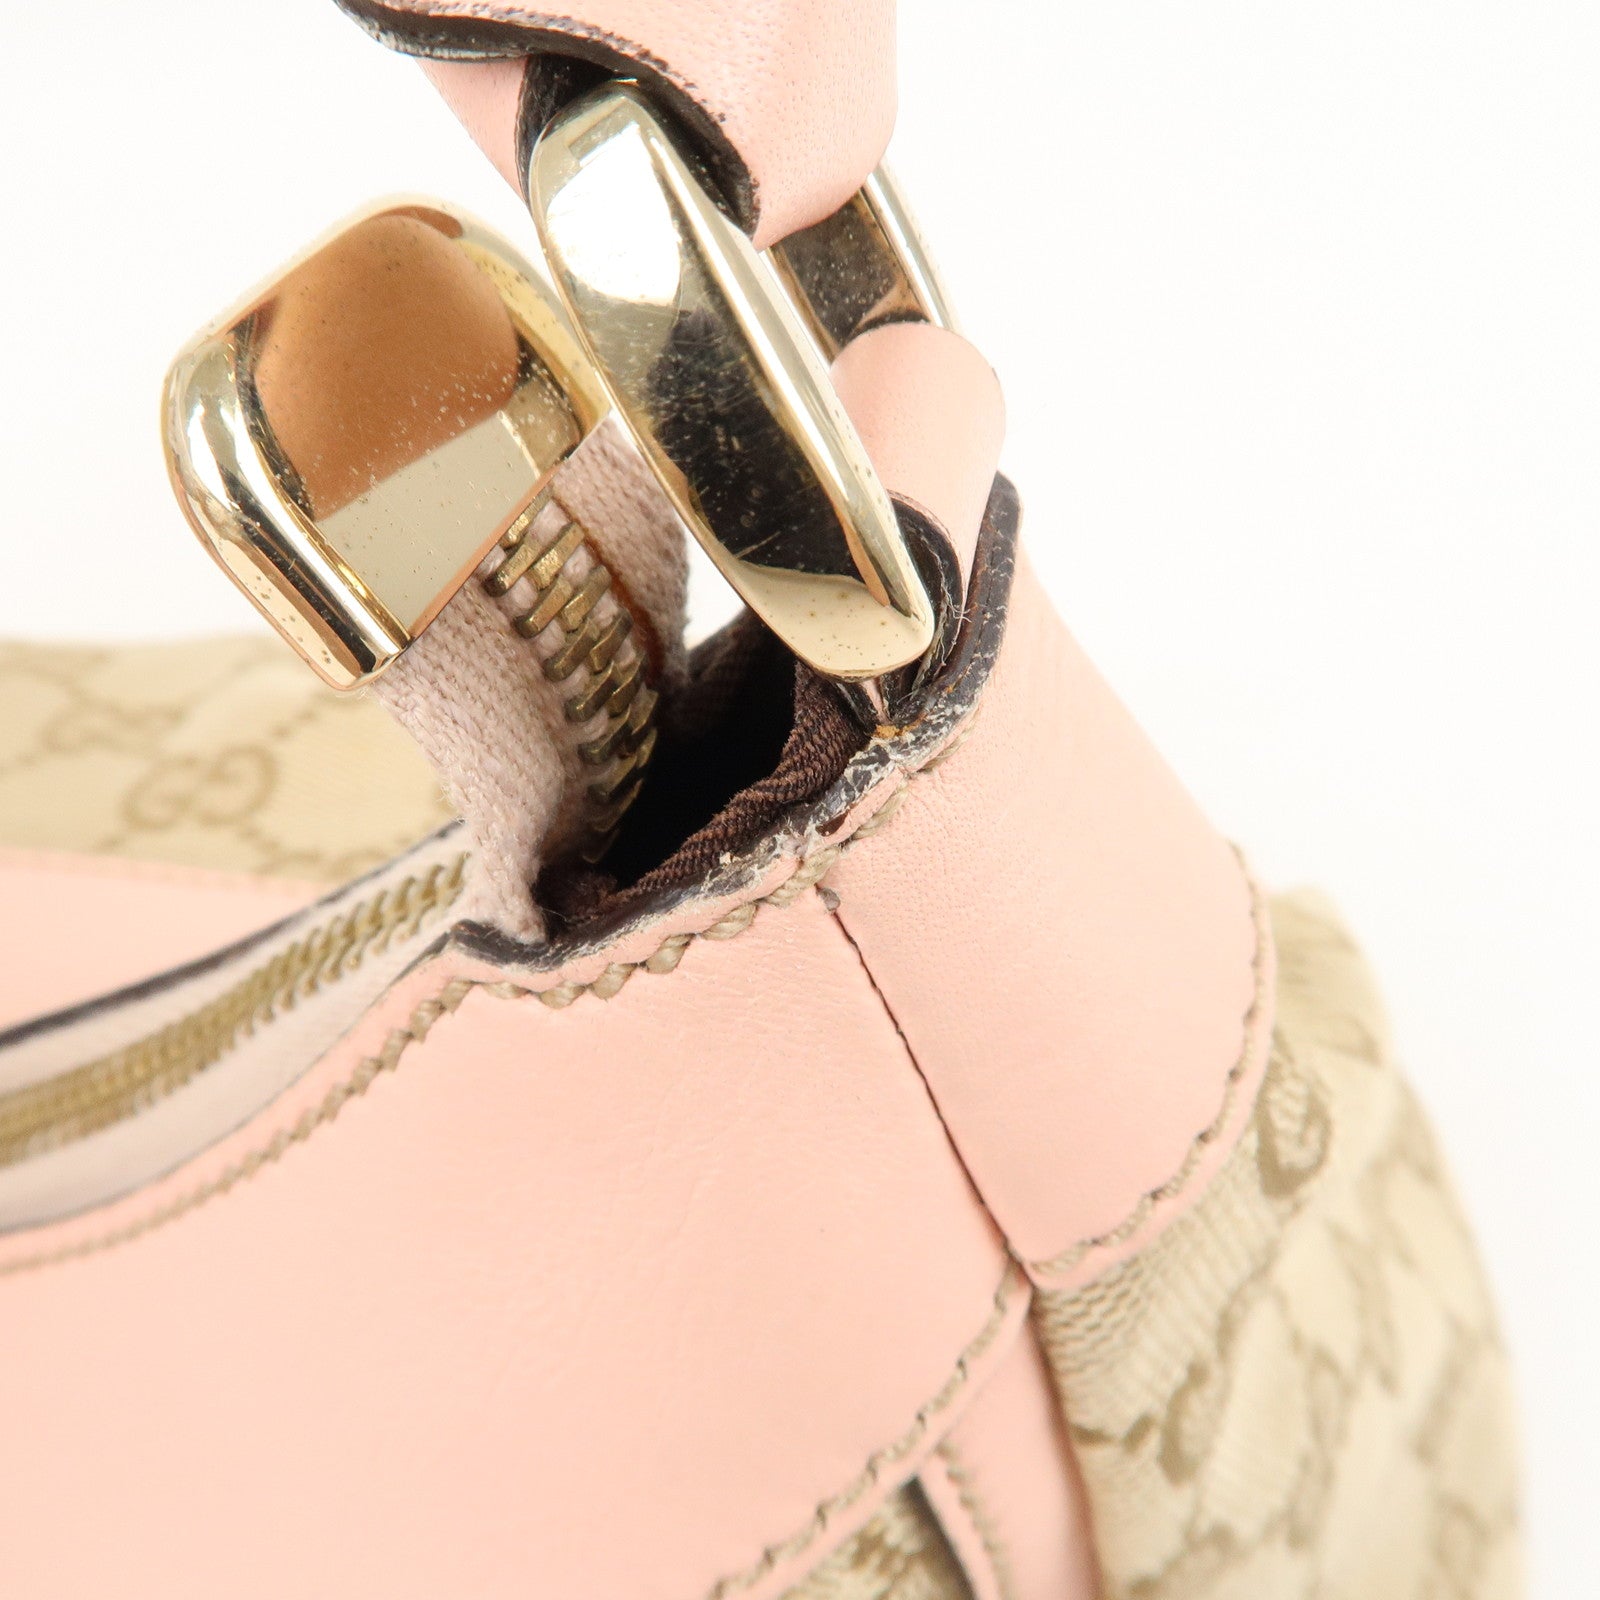 GUCCI-Abbey-GG-Canvas-Leather-Shoulder-Bag-Beige-Pink-190525 –  dct-ep_vintage luxury Store